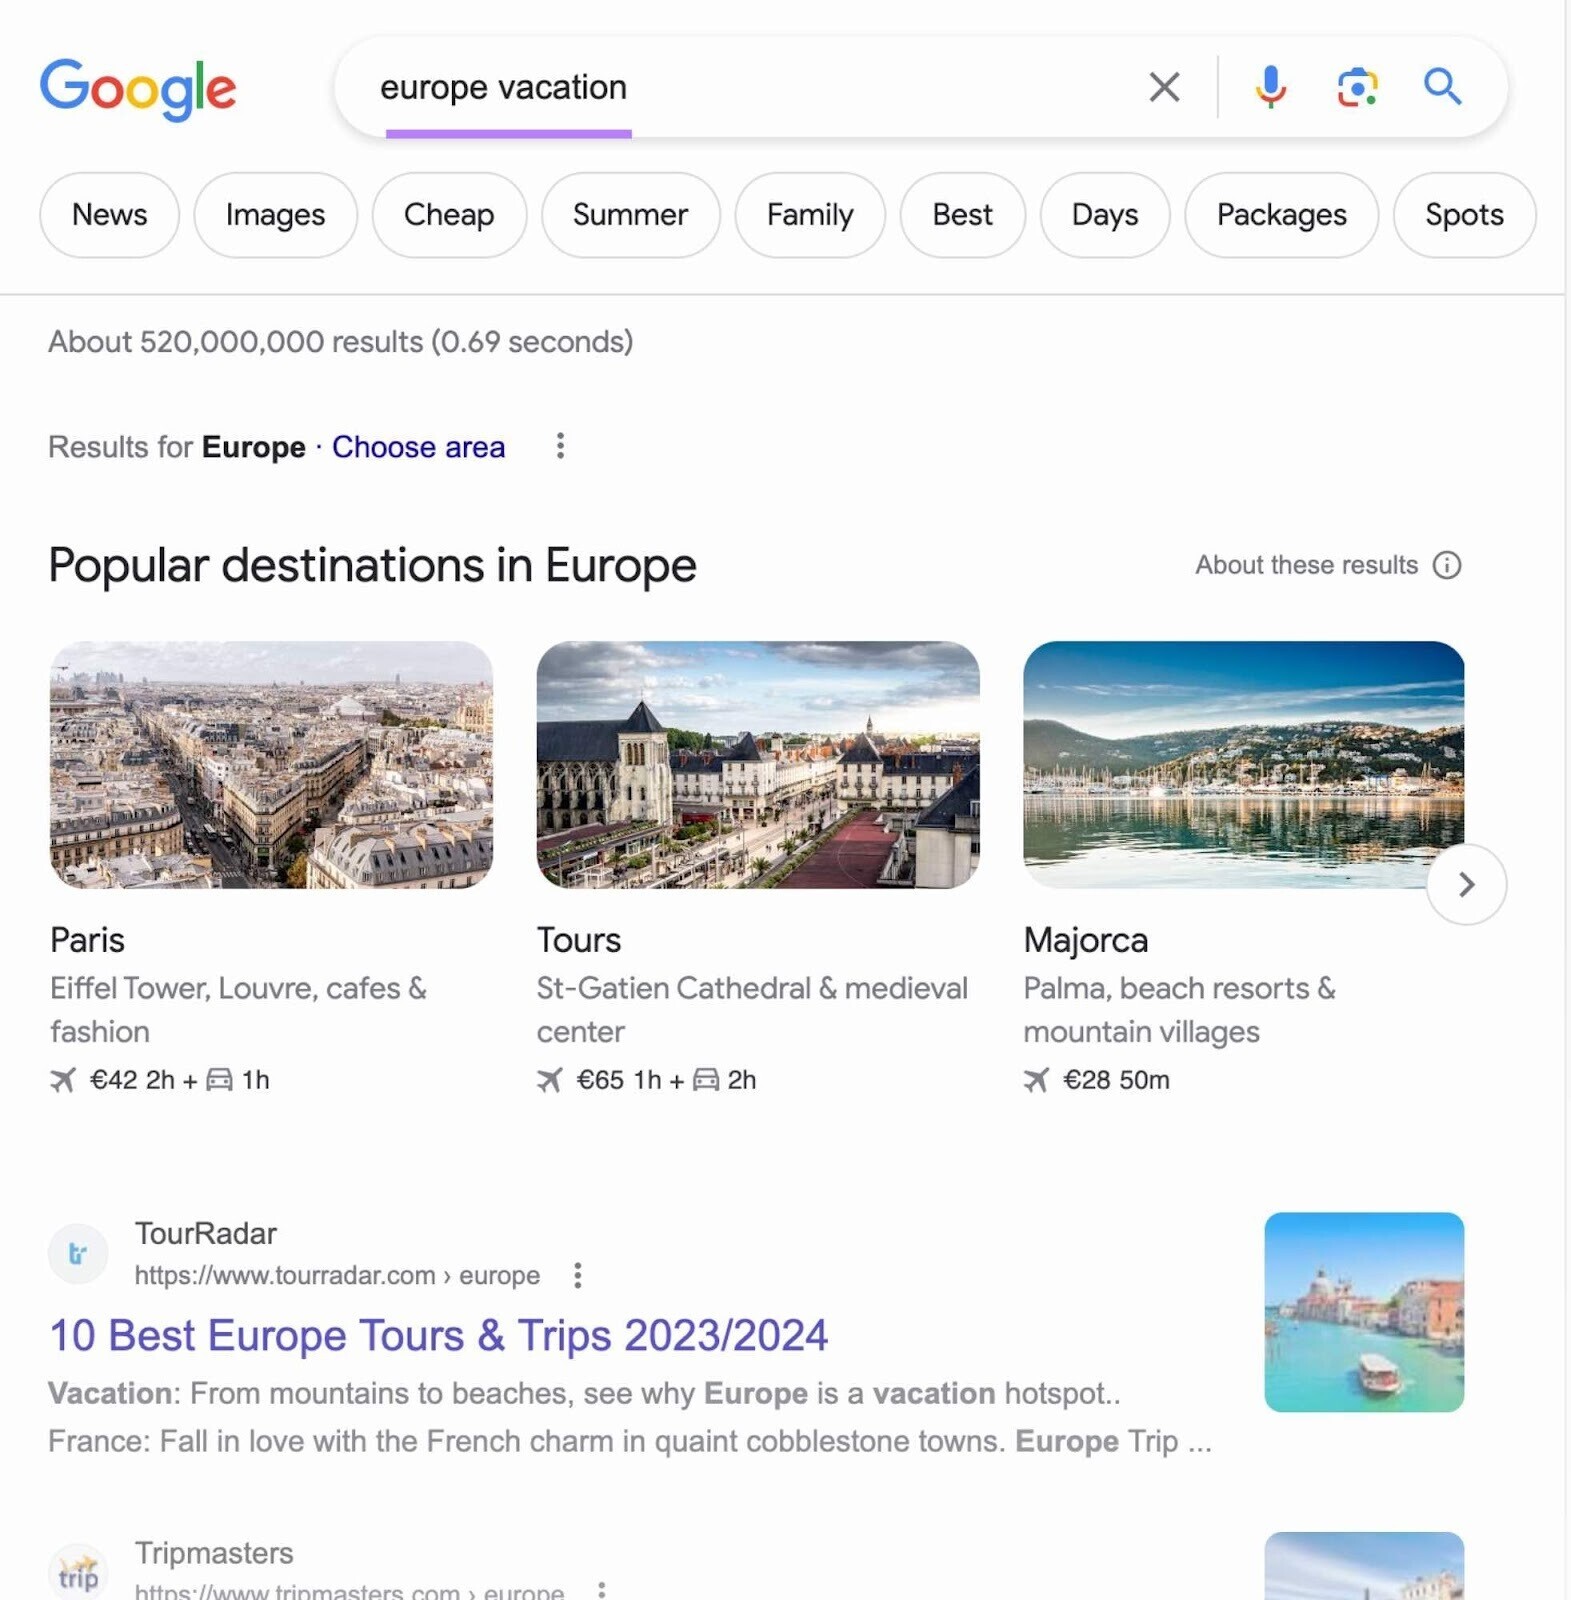 an example of Google search for "europe vacation"